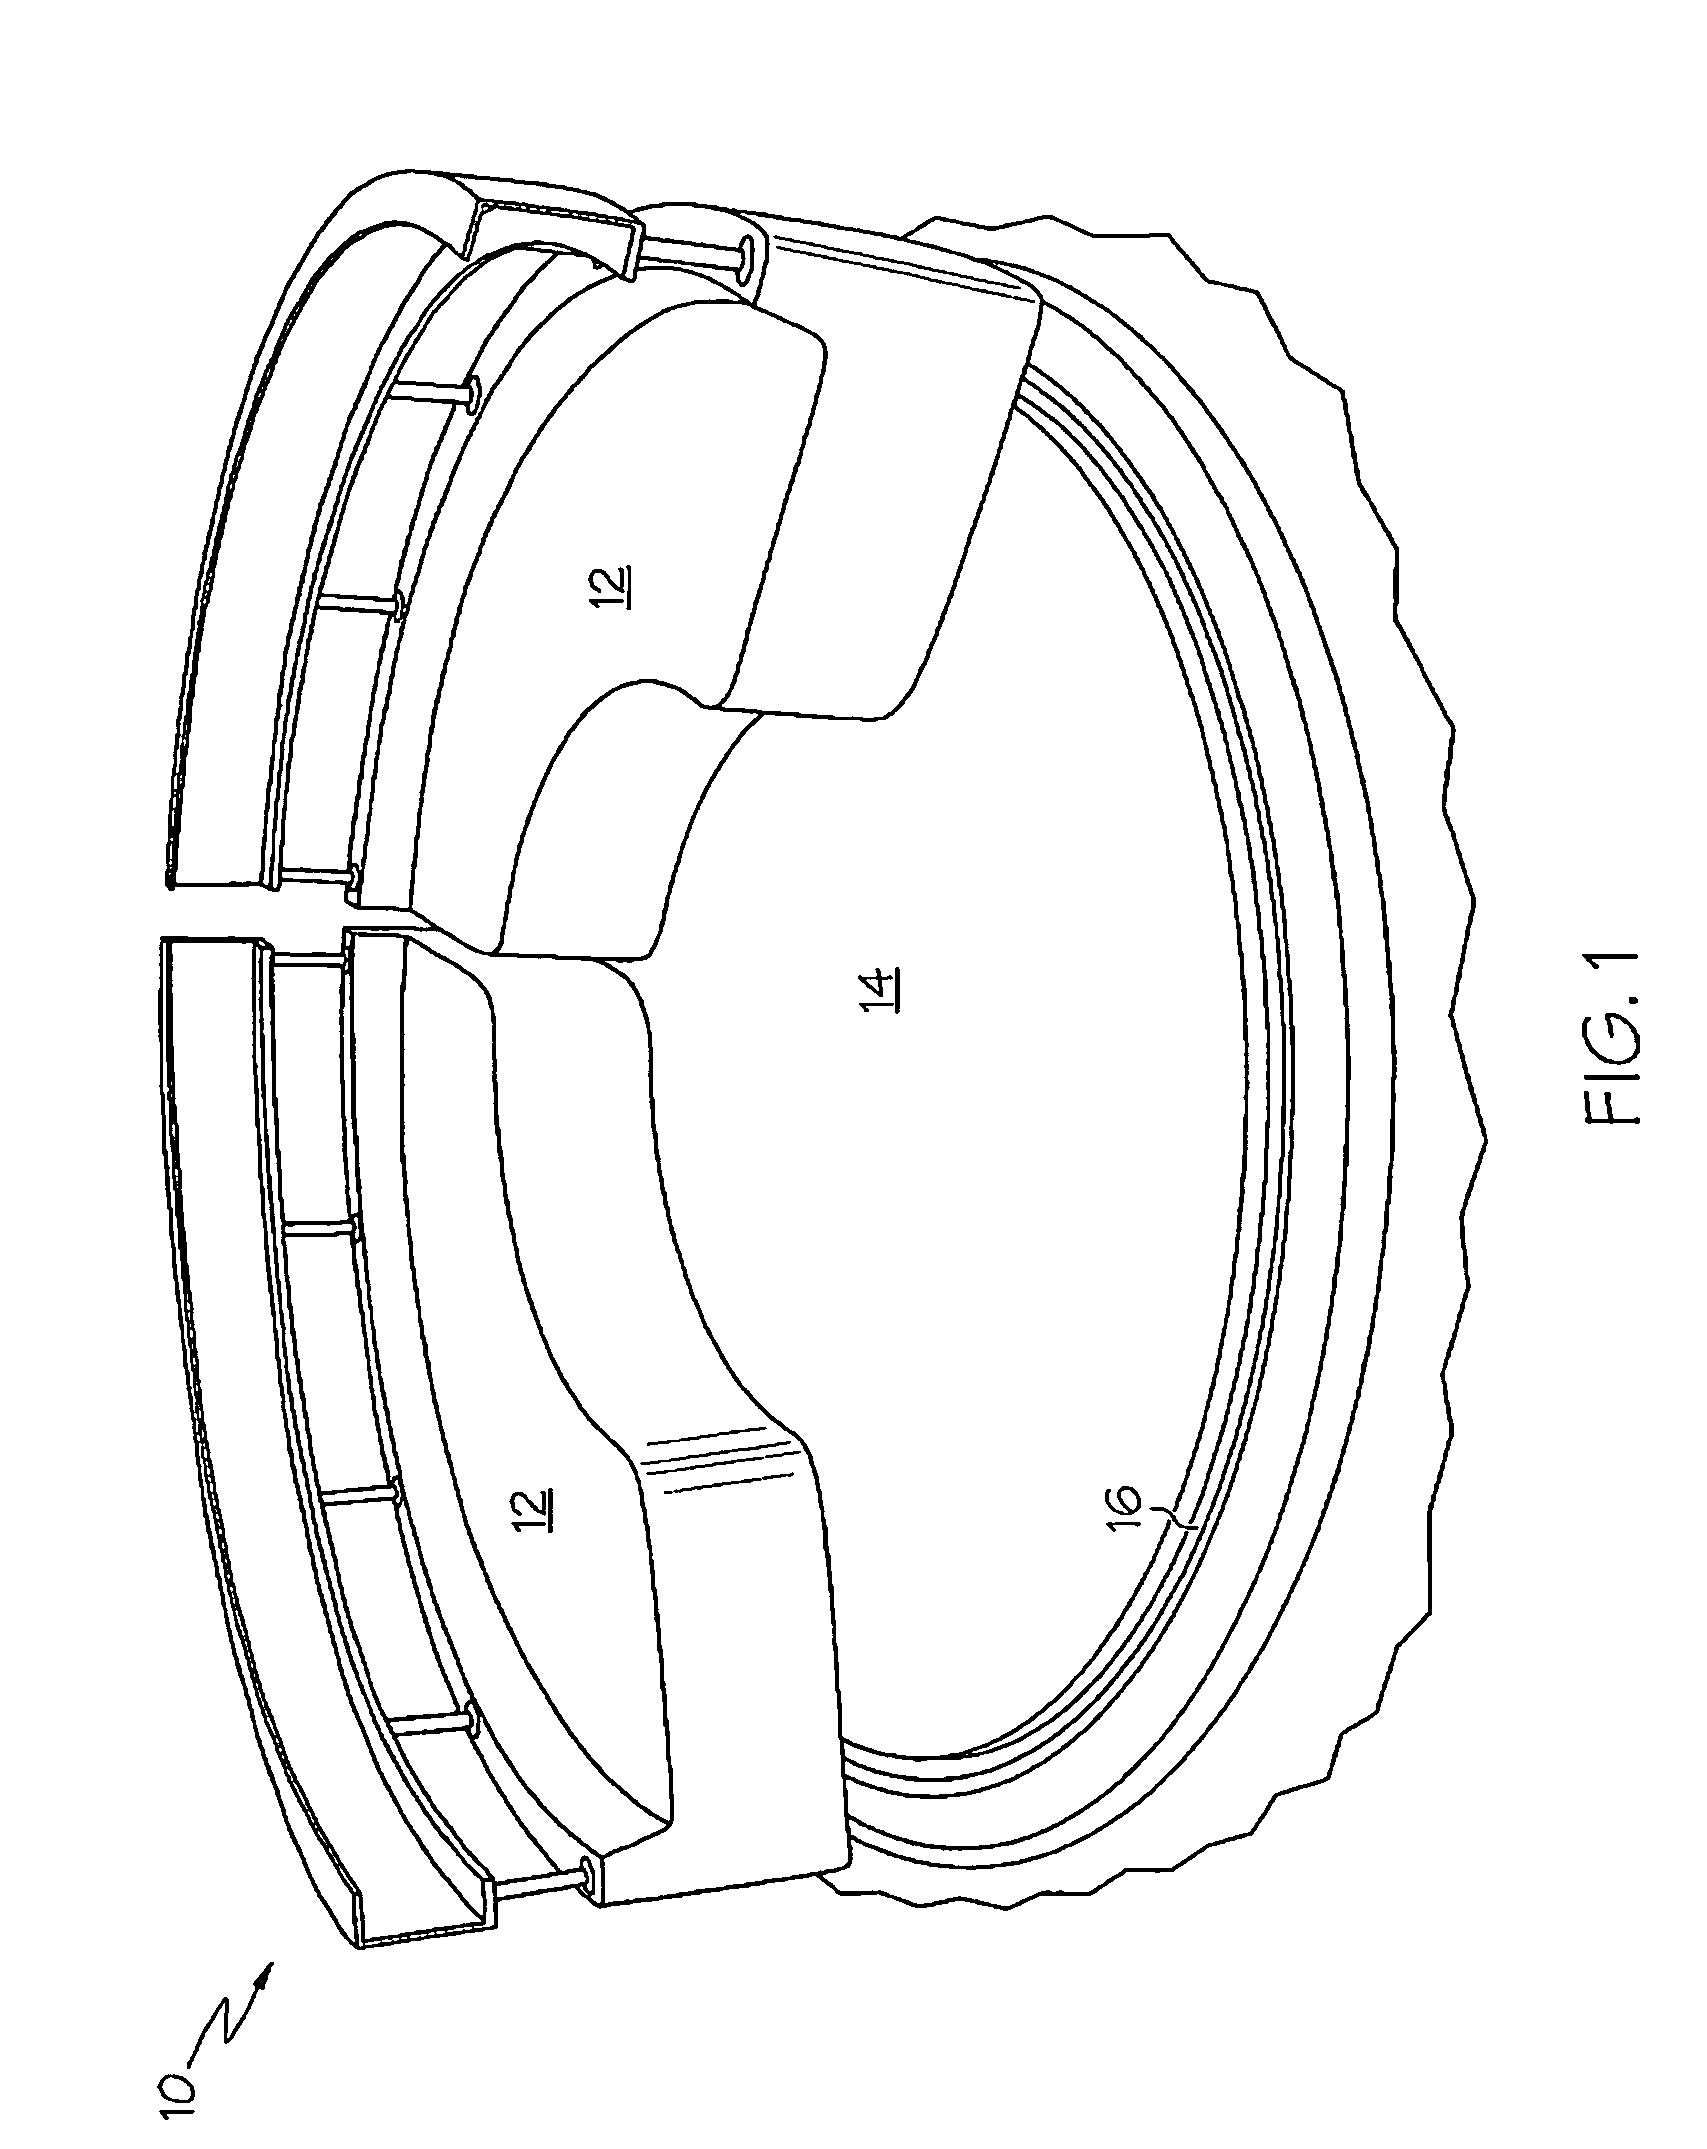 Rotating seating system for marine vessel